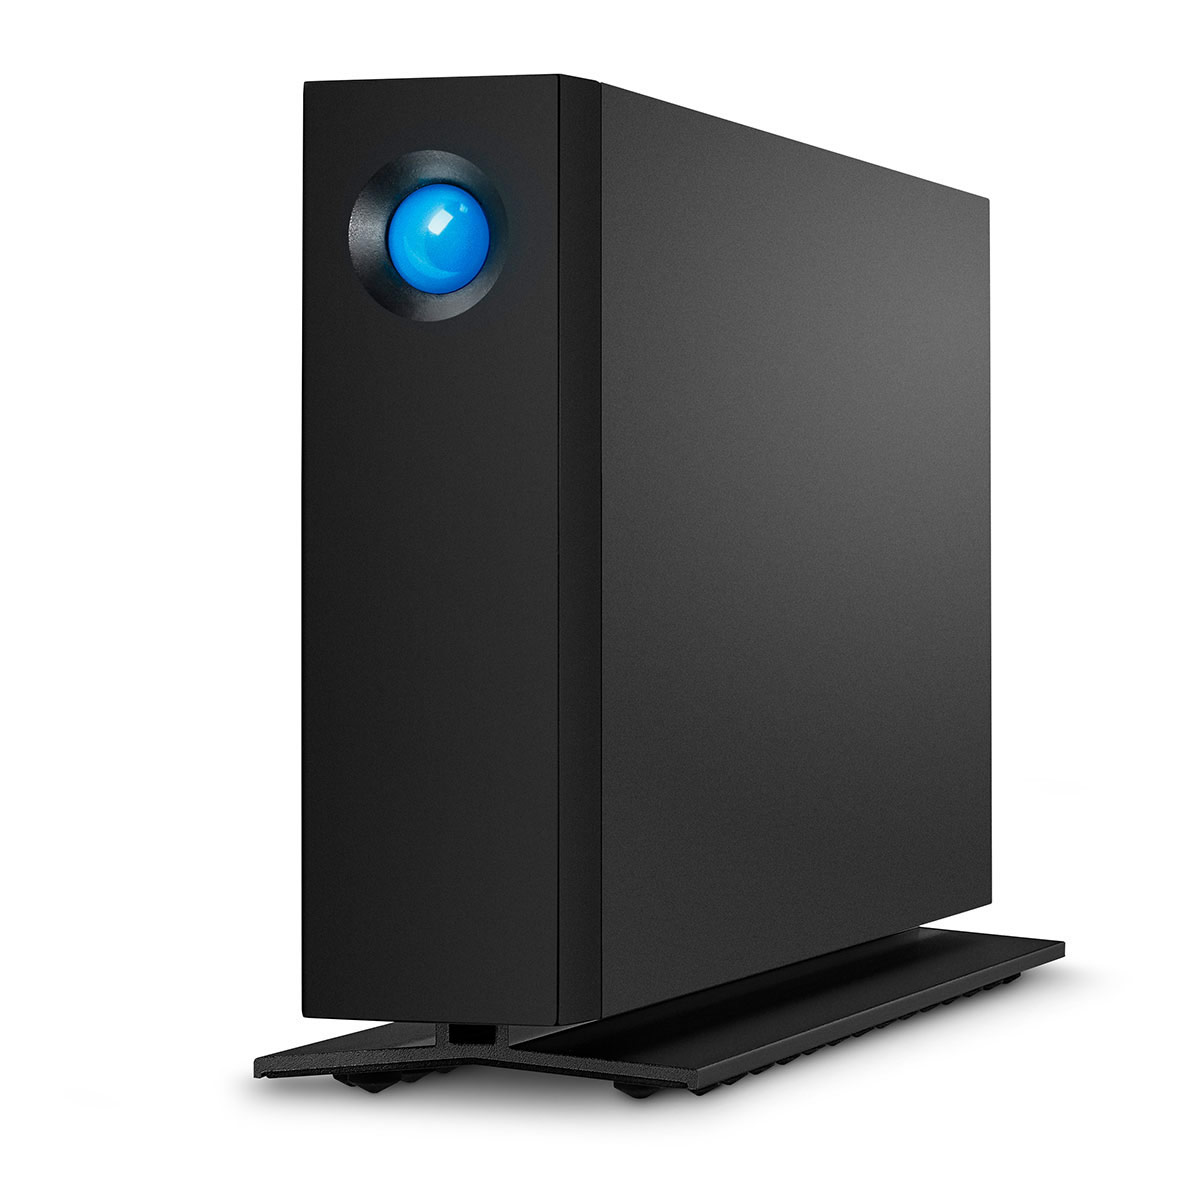 lacie external hard drive troubleshooting